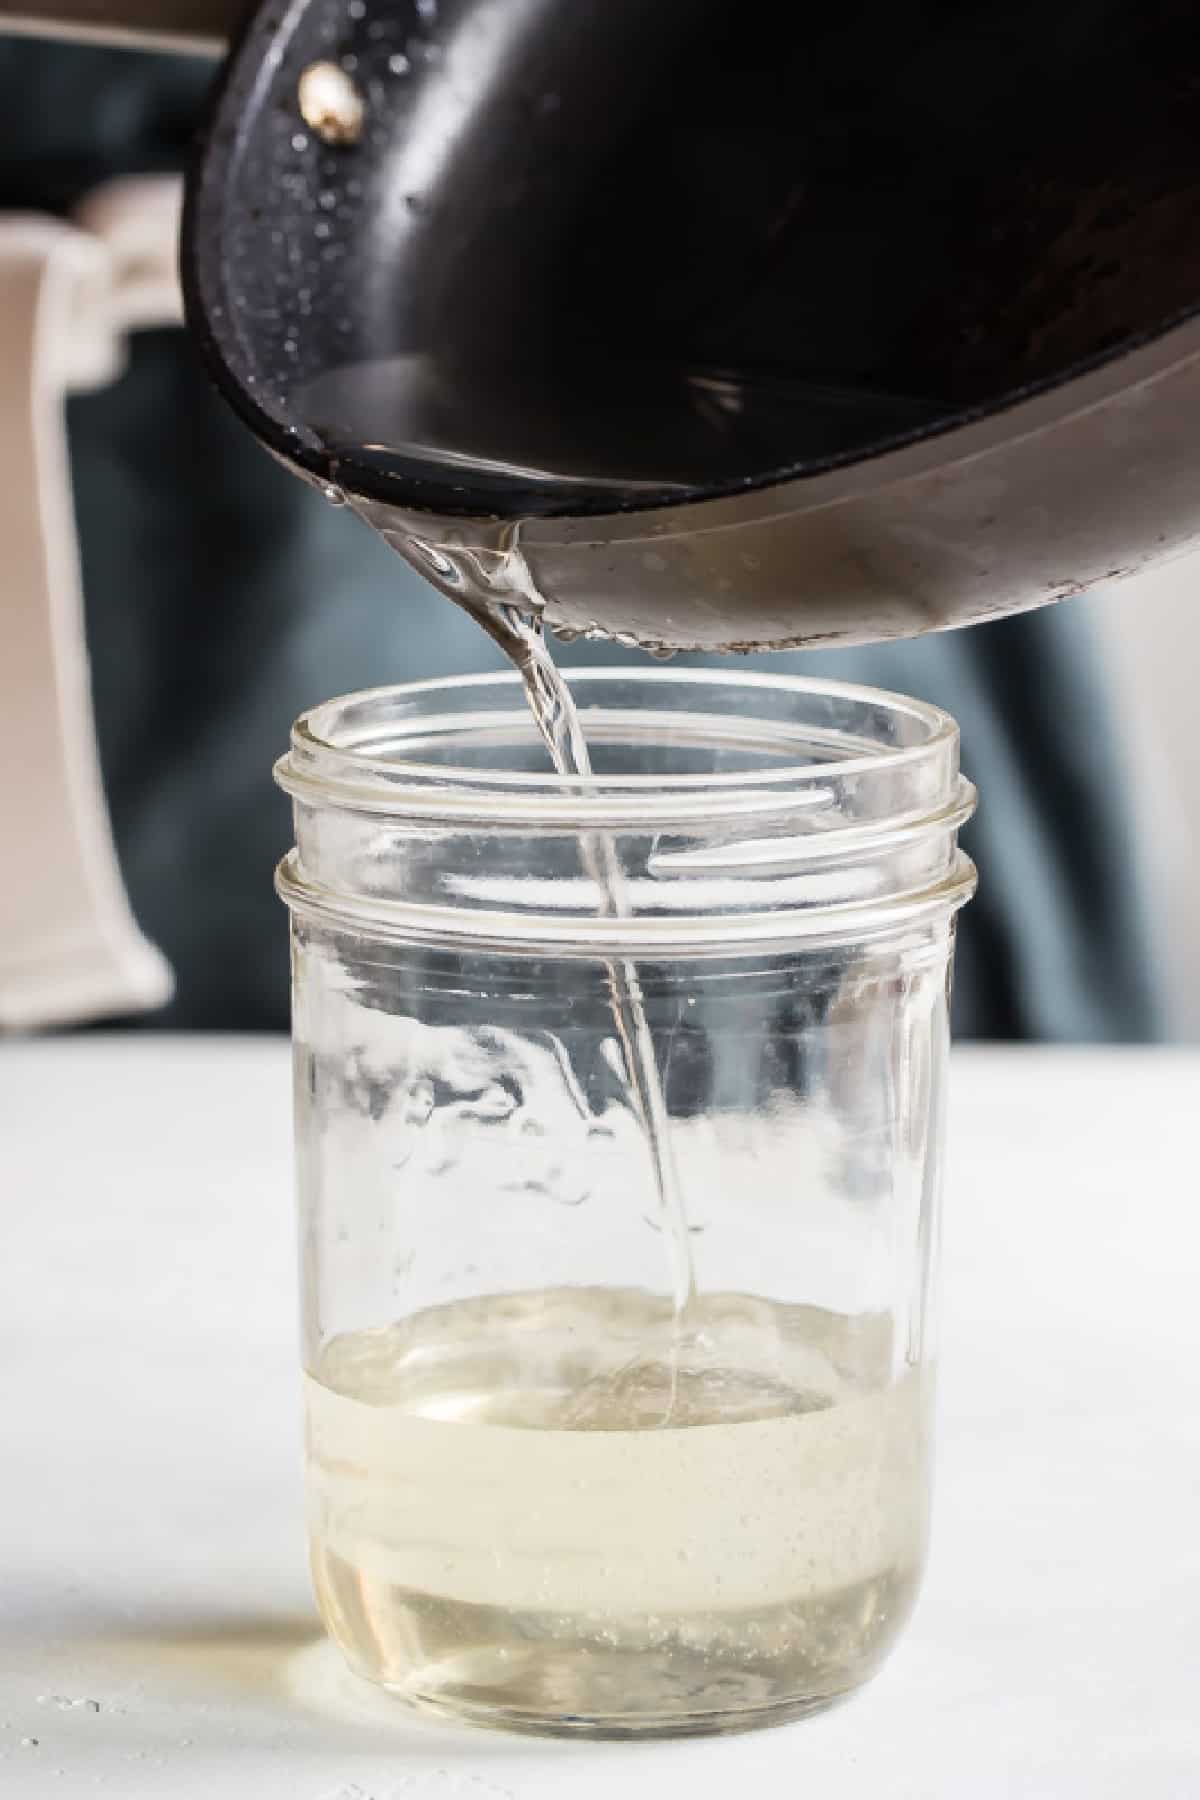 Pouring simple syrup into a jar.